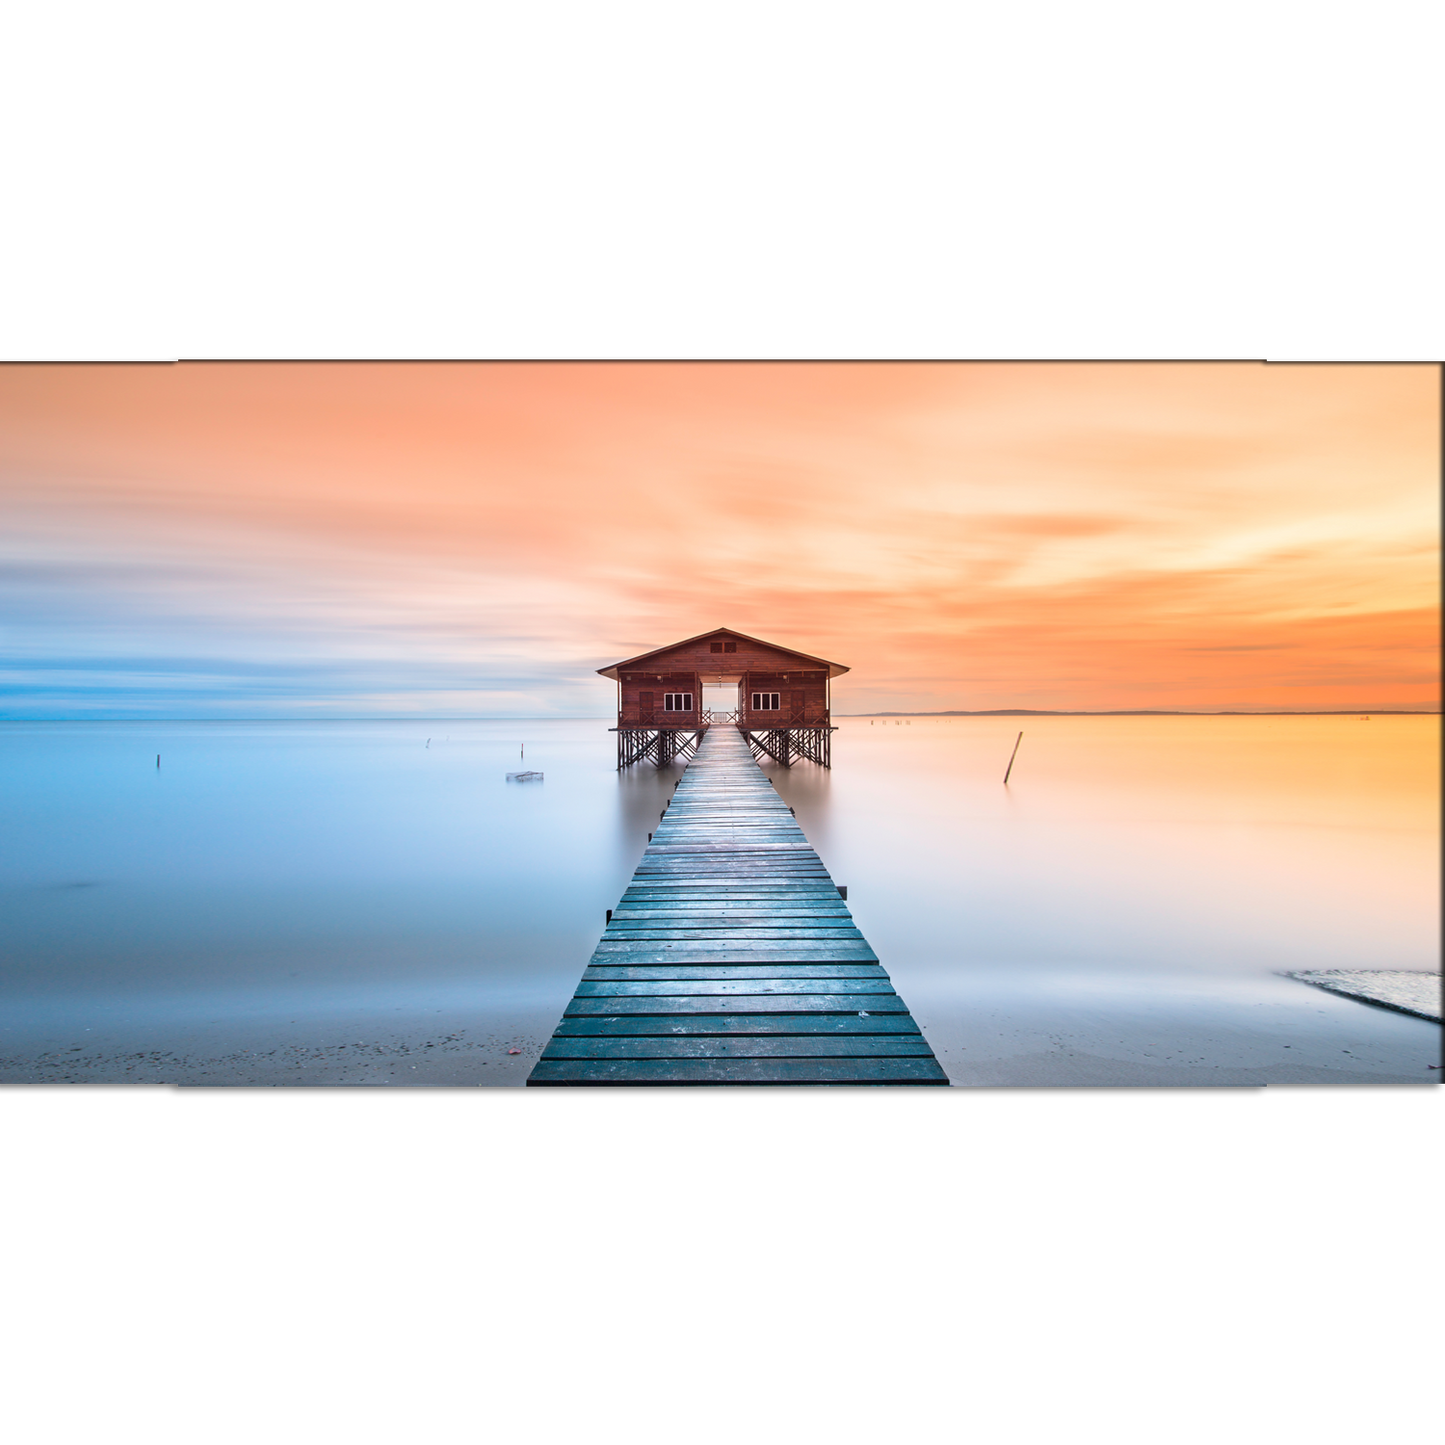 Seaside Bridge In Sunset Abstract Canvas Wall Painting